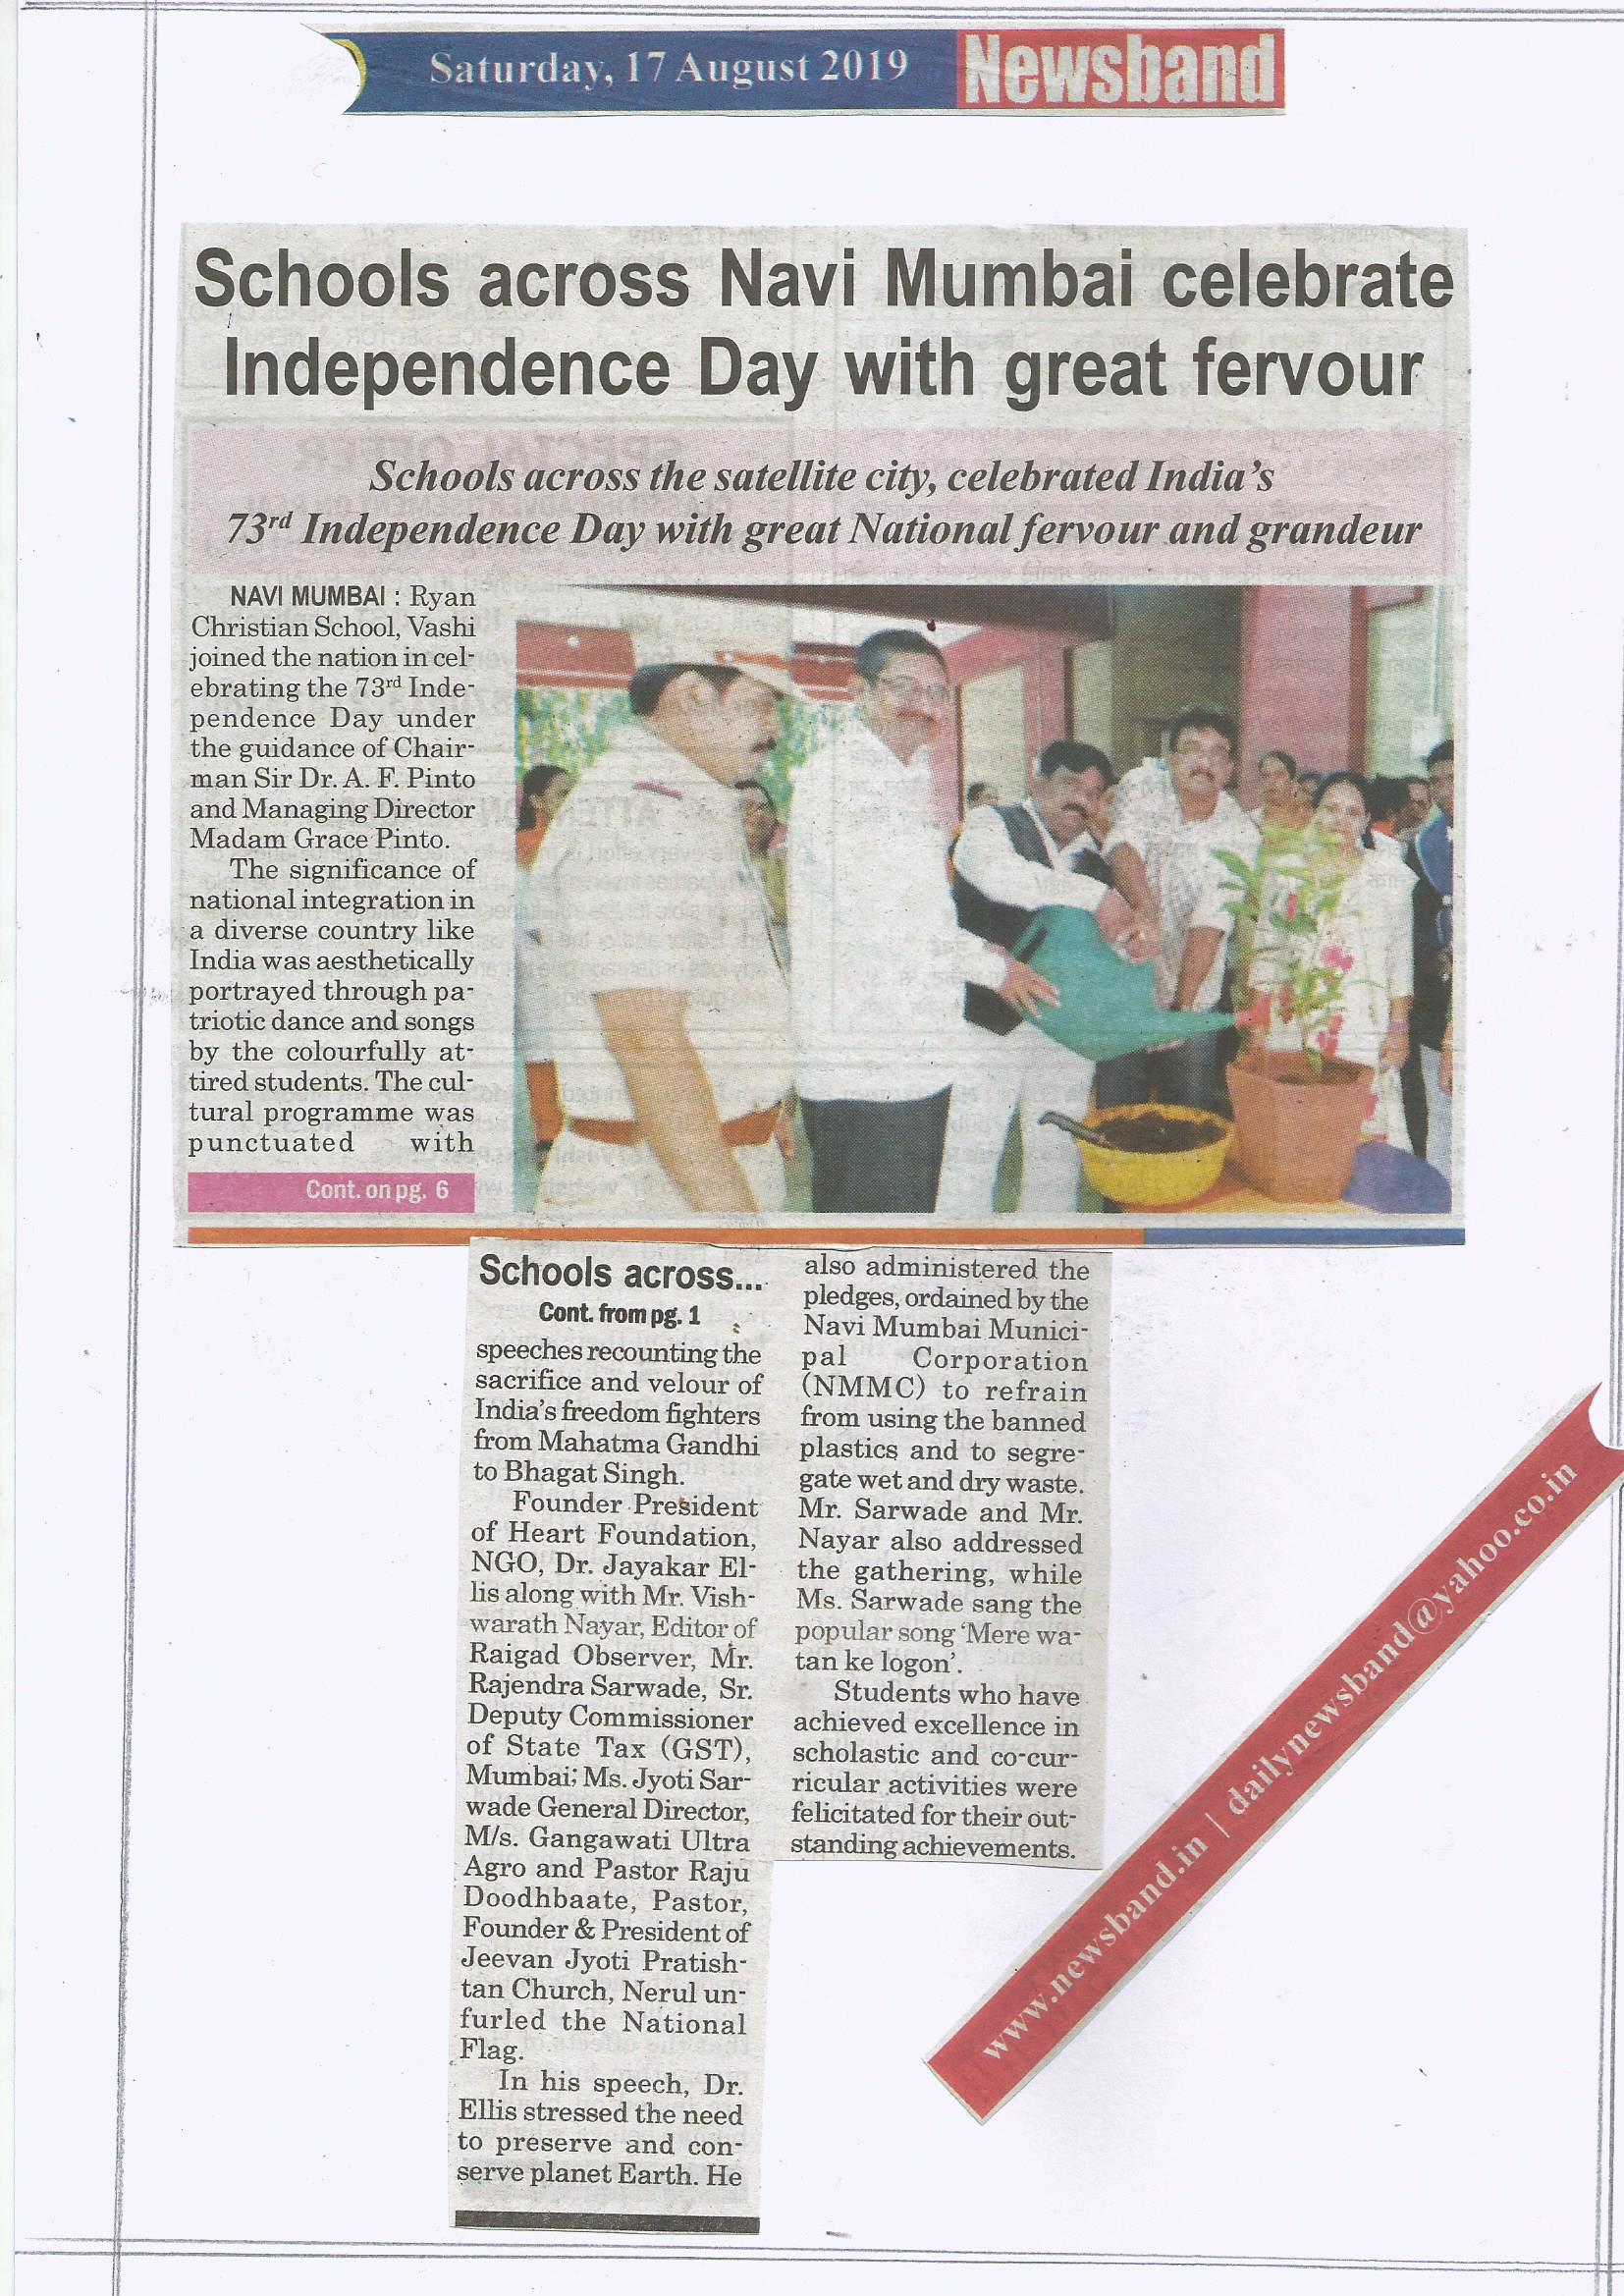 Independence Day was featured in Newsband